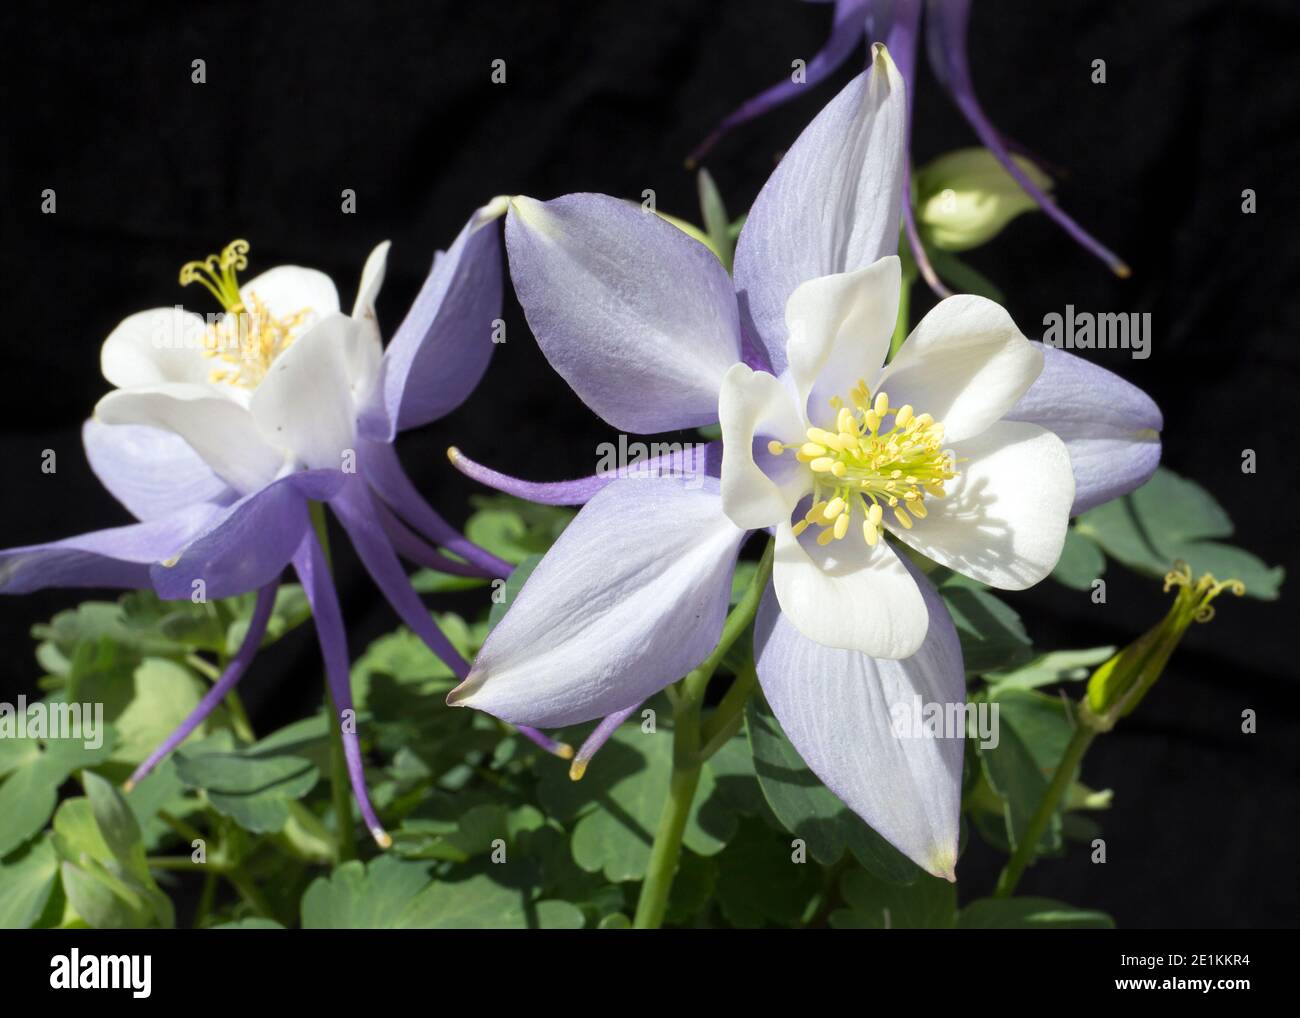 These are blue and white flowers of a plant commonly known as a Columbine, of the genus Aquilegia. It is a perennial. Stock Photo